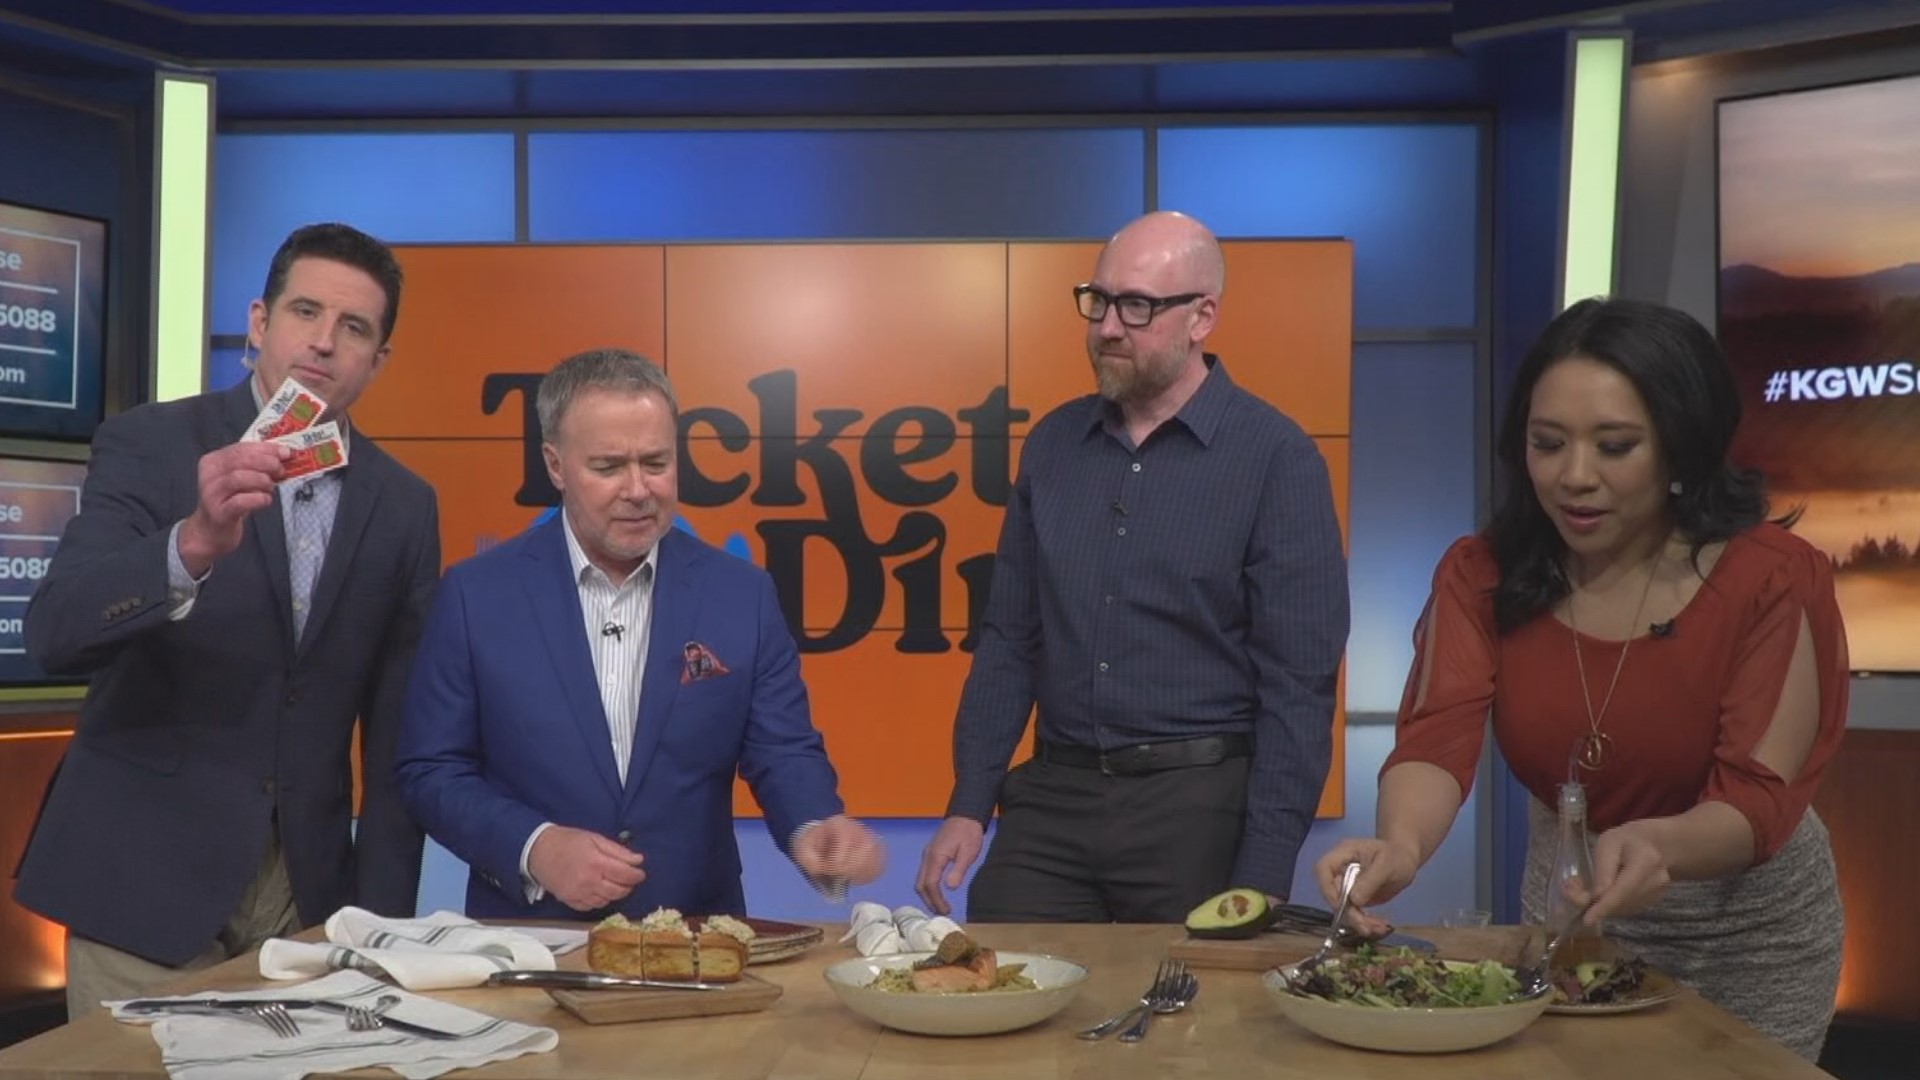 'Ticket to Dine PDX' encourages people to rediscover restaurants in downtown Portland while giving them the chance to win prizes. It runs from March 17-26.